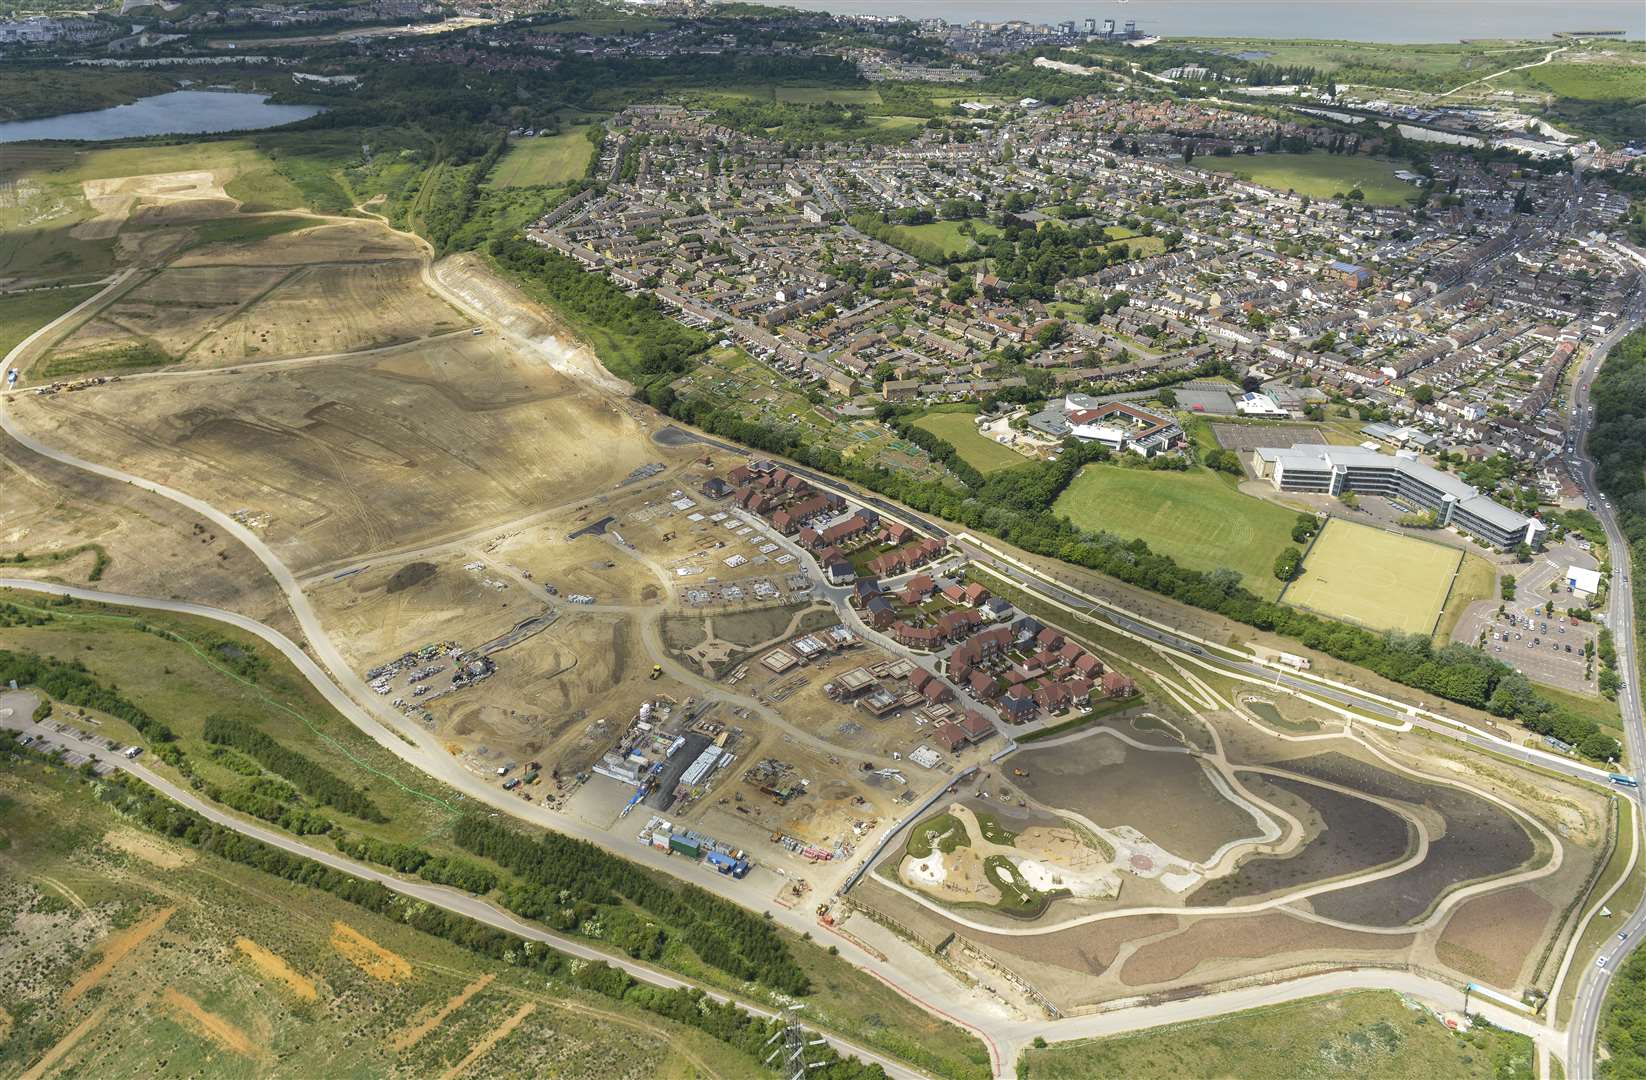 The Eastern Quarry, named Whitecliffe at Ebbsfleet Garden City, is the largest development where there are plans for more than 6,000 homes.